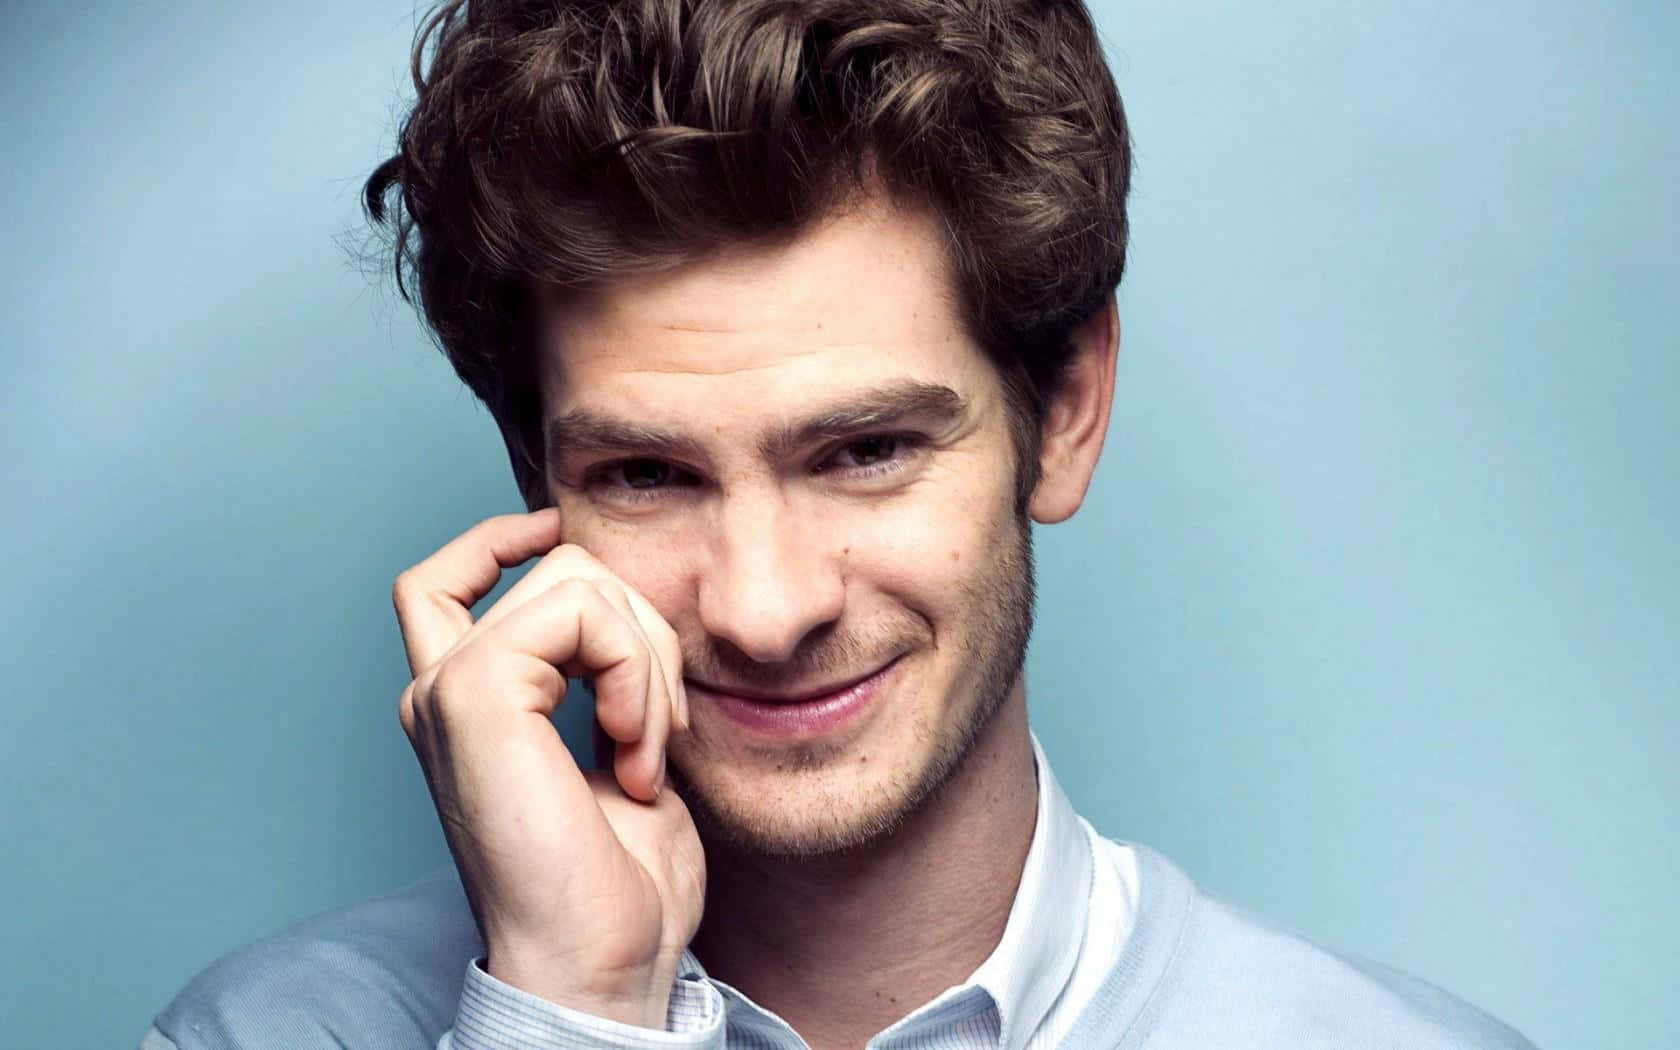 Andrew Garfield strikes a pose on the red carpet.